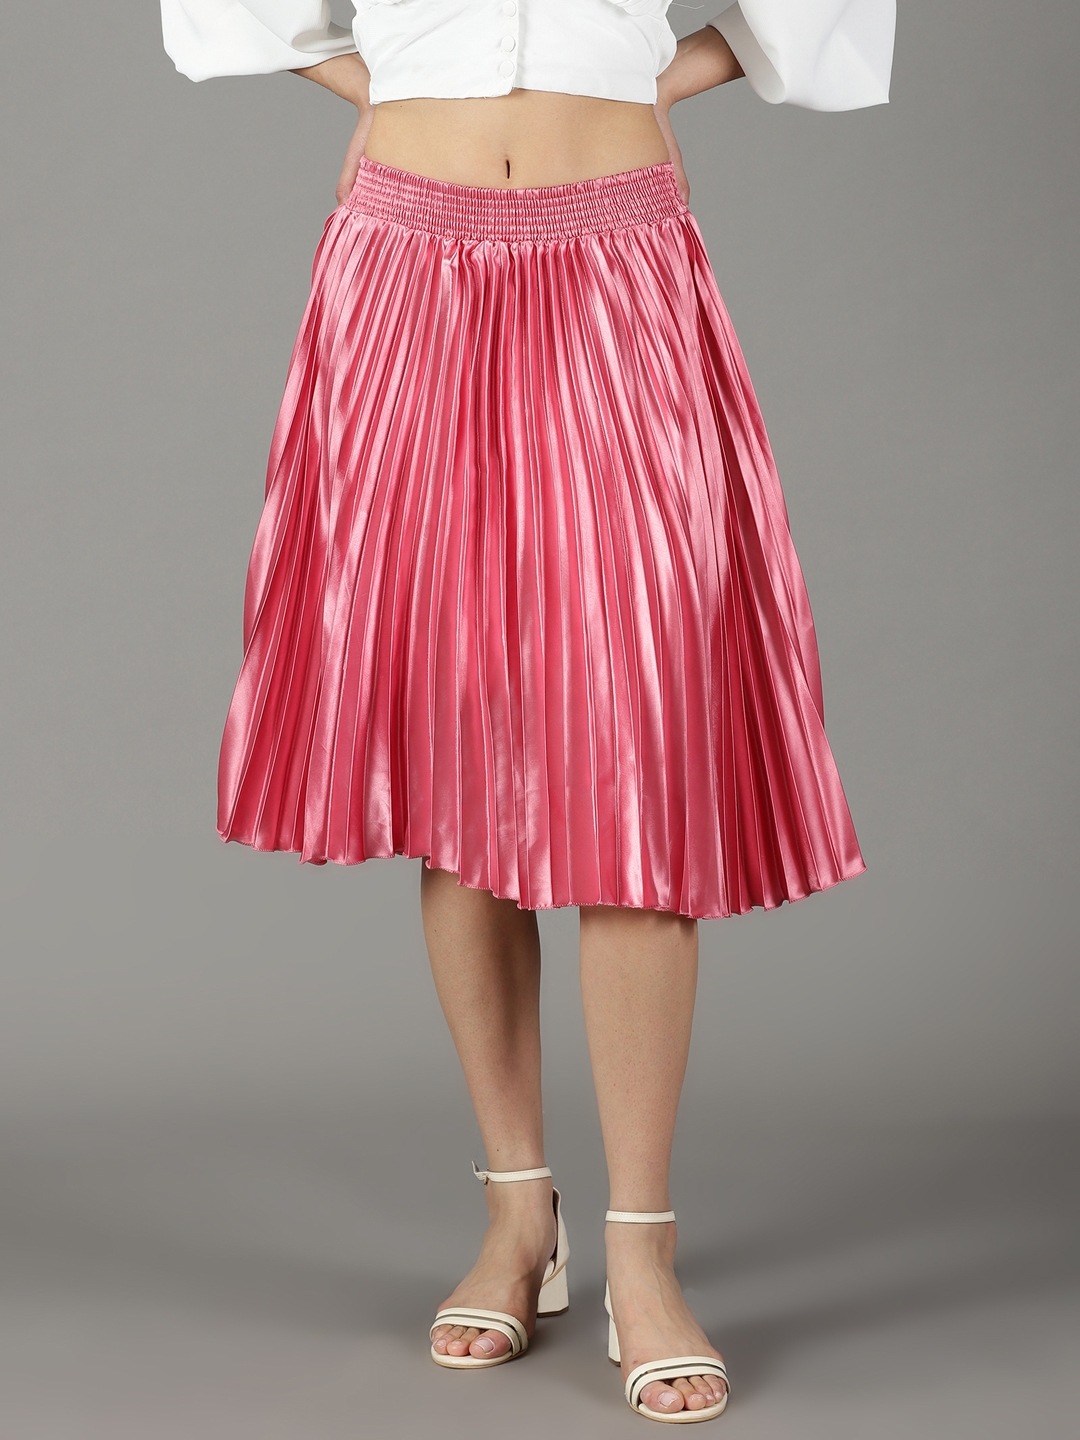 SHOWOFF Women's Solid Pink Satin Flared Skirt